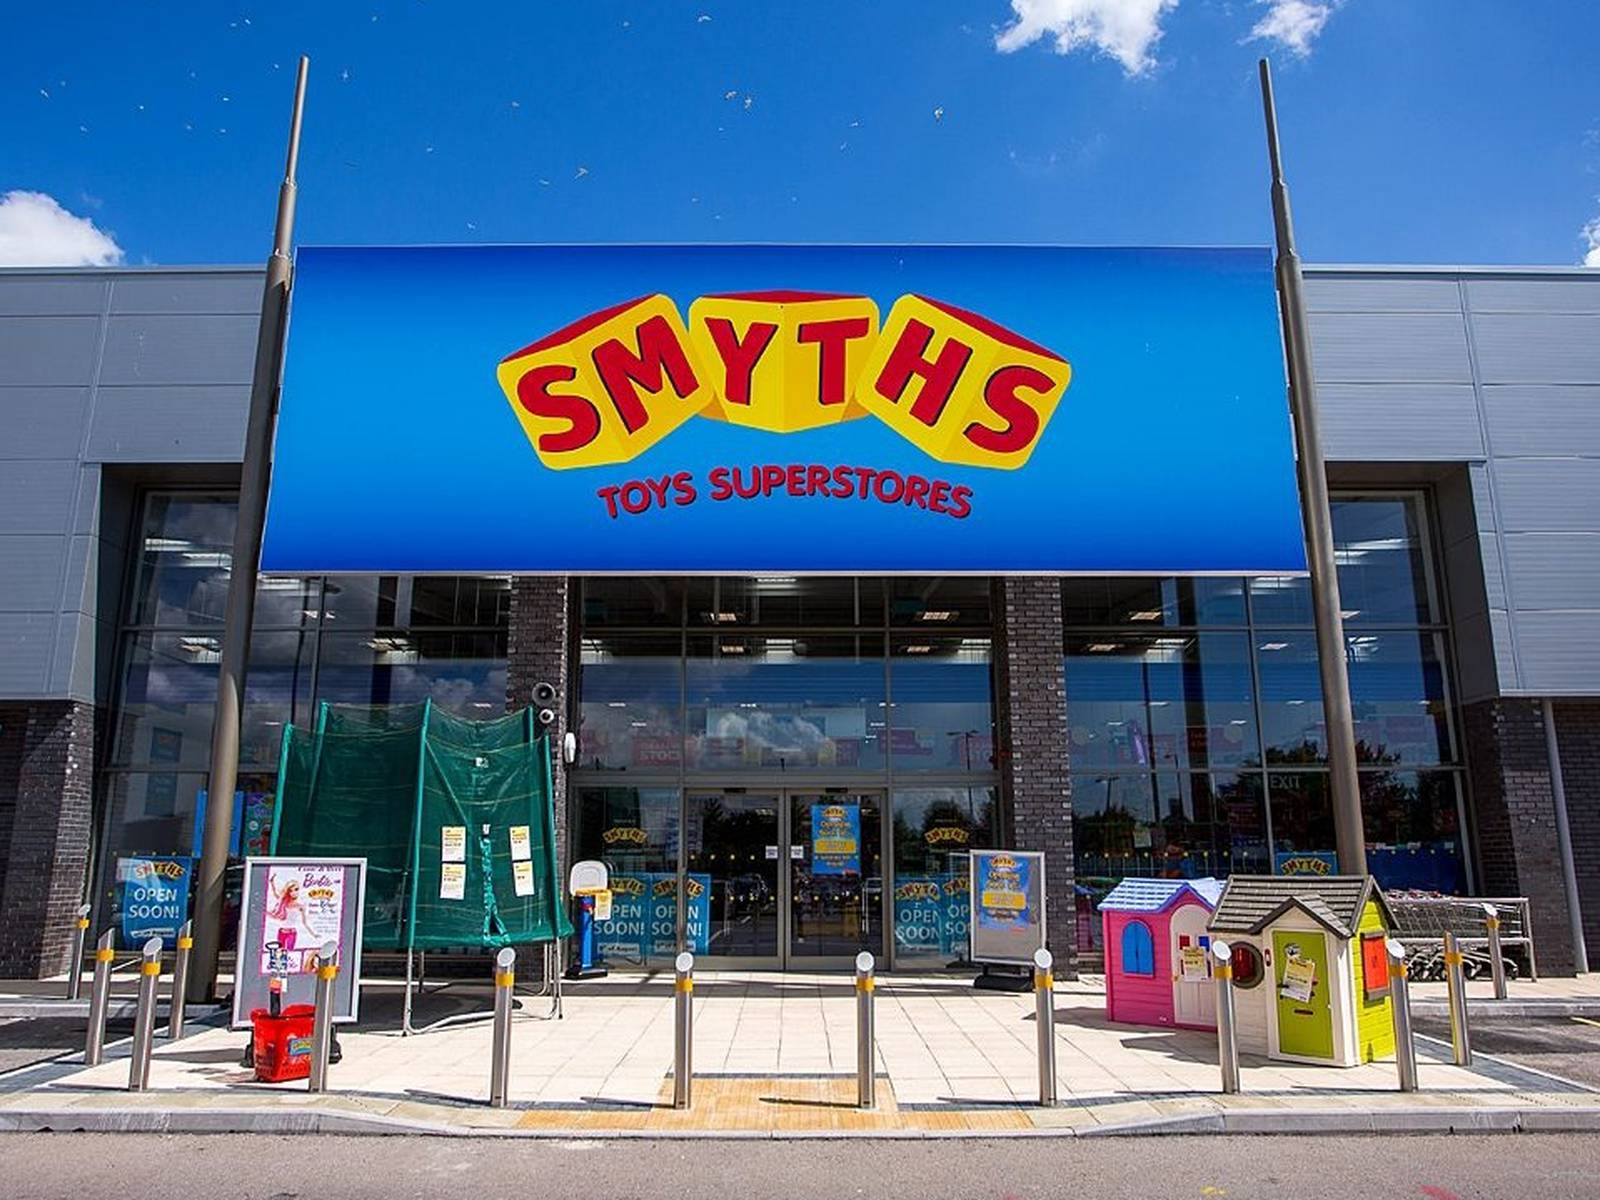 Meet the Smyths, the Mayo family turning toy retailing into